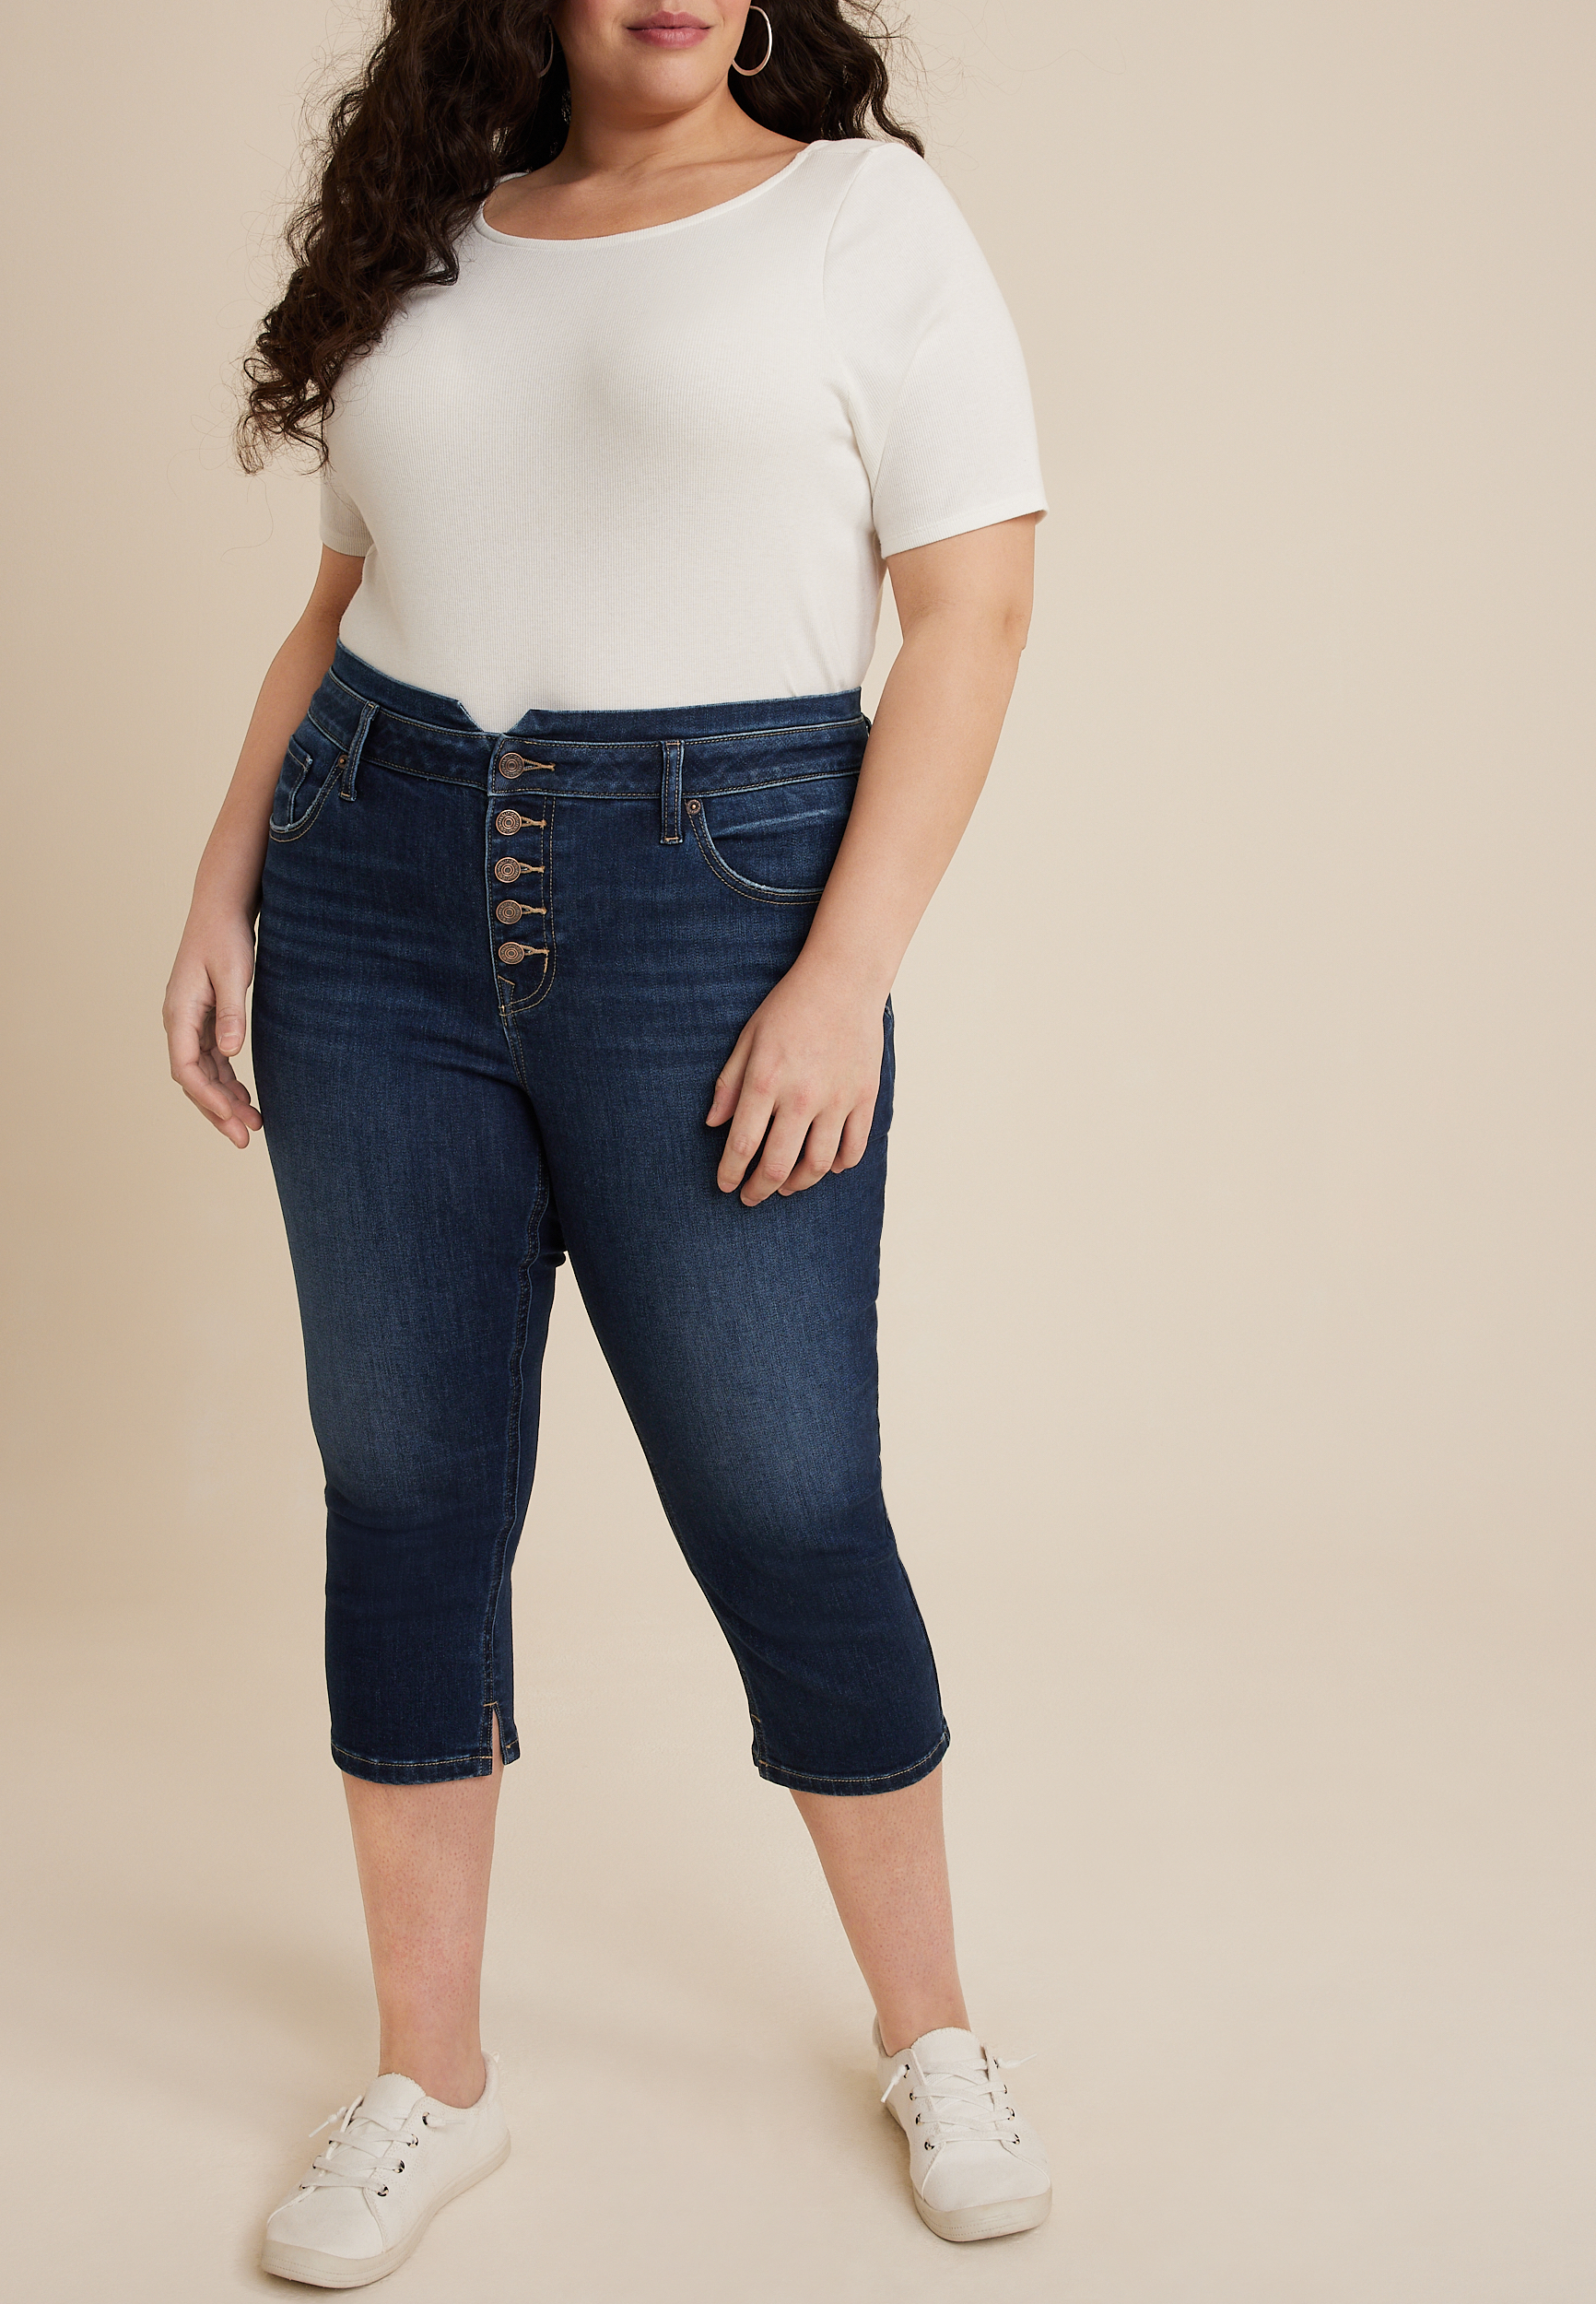 Plus Size Clothing for Women in Sizes 14-40